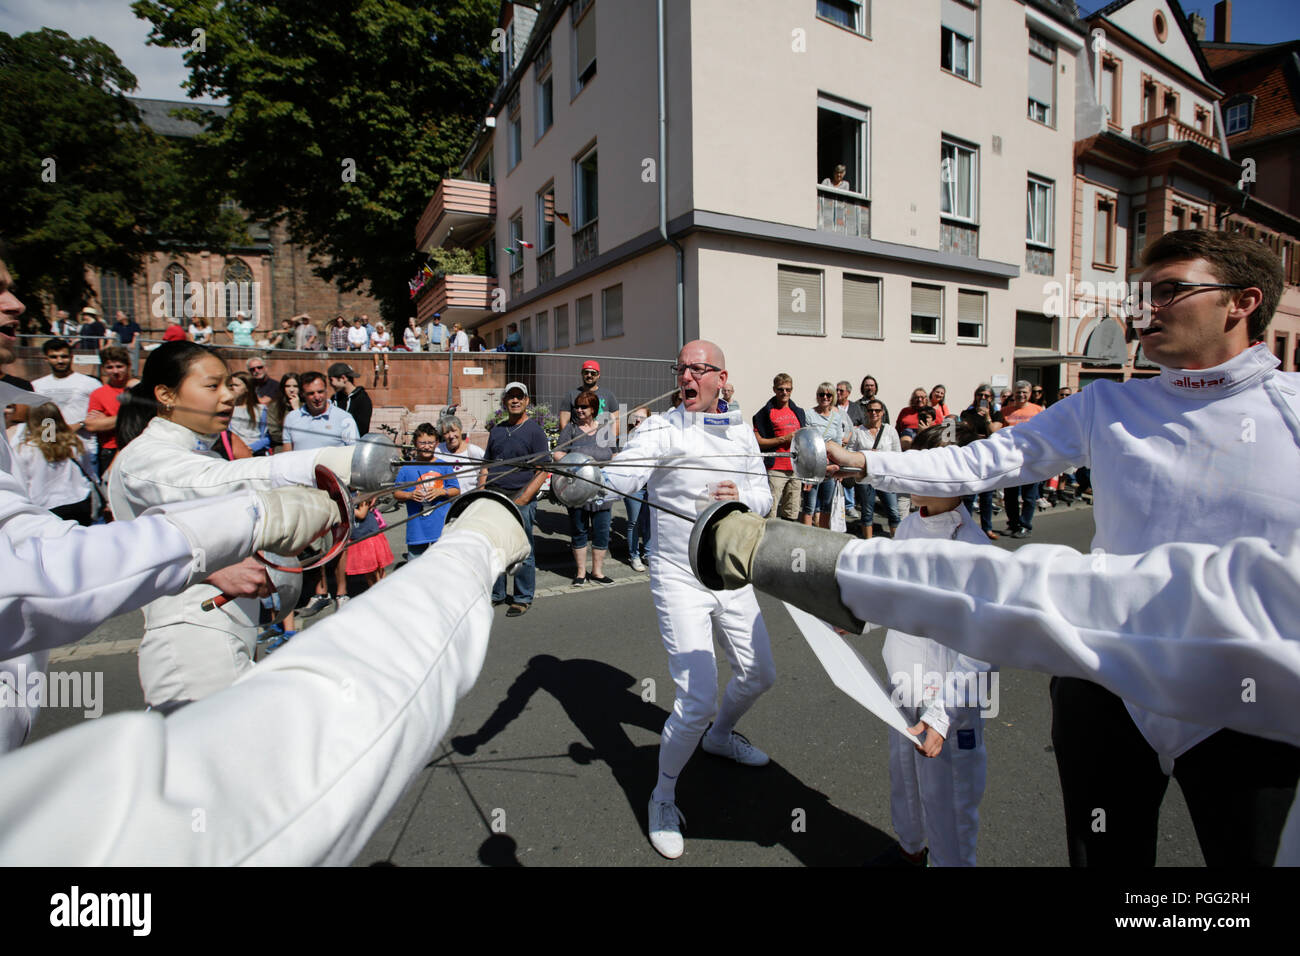 Worms, Germany. 26th August 2018. Fencers present their weapons in the parade. The first highlight of the 2018 Backfischfest was the big parade through the city of Worms with over 70 groups and floats. Community groups, music groups and businesses from Worms and further afield took part. Credit: Michael Debets/Alamy Live News Stock Photo